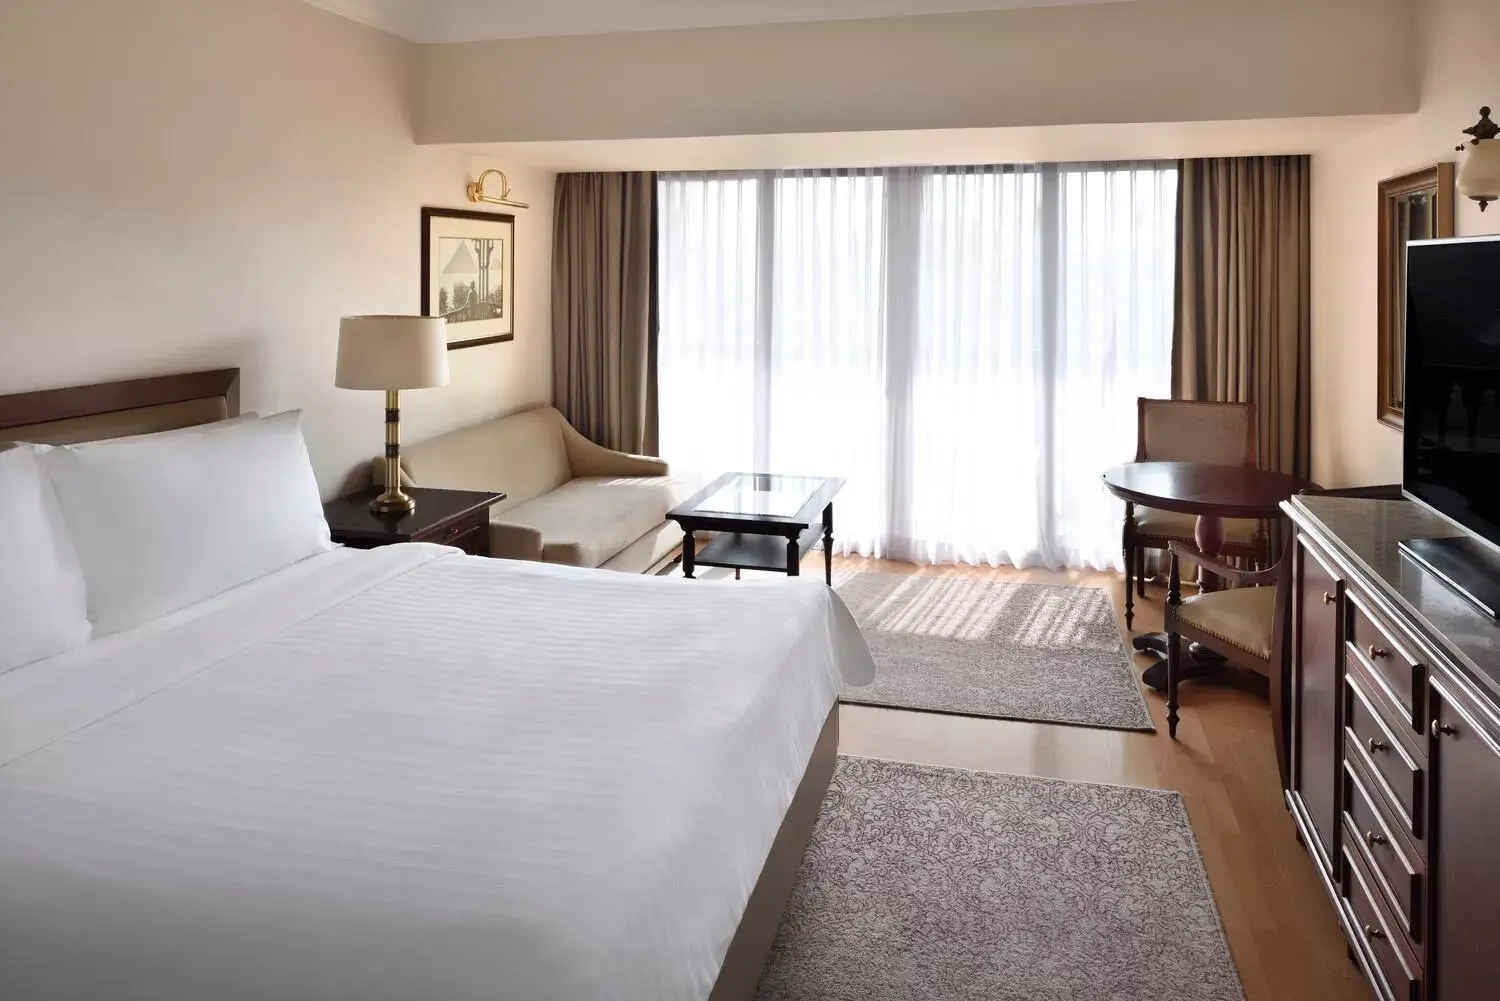 Deluxe Pyramid Premium Room- King Bed in Marriott Mena House, Cairo